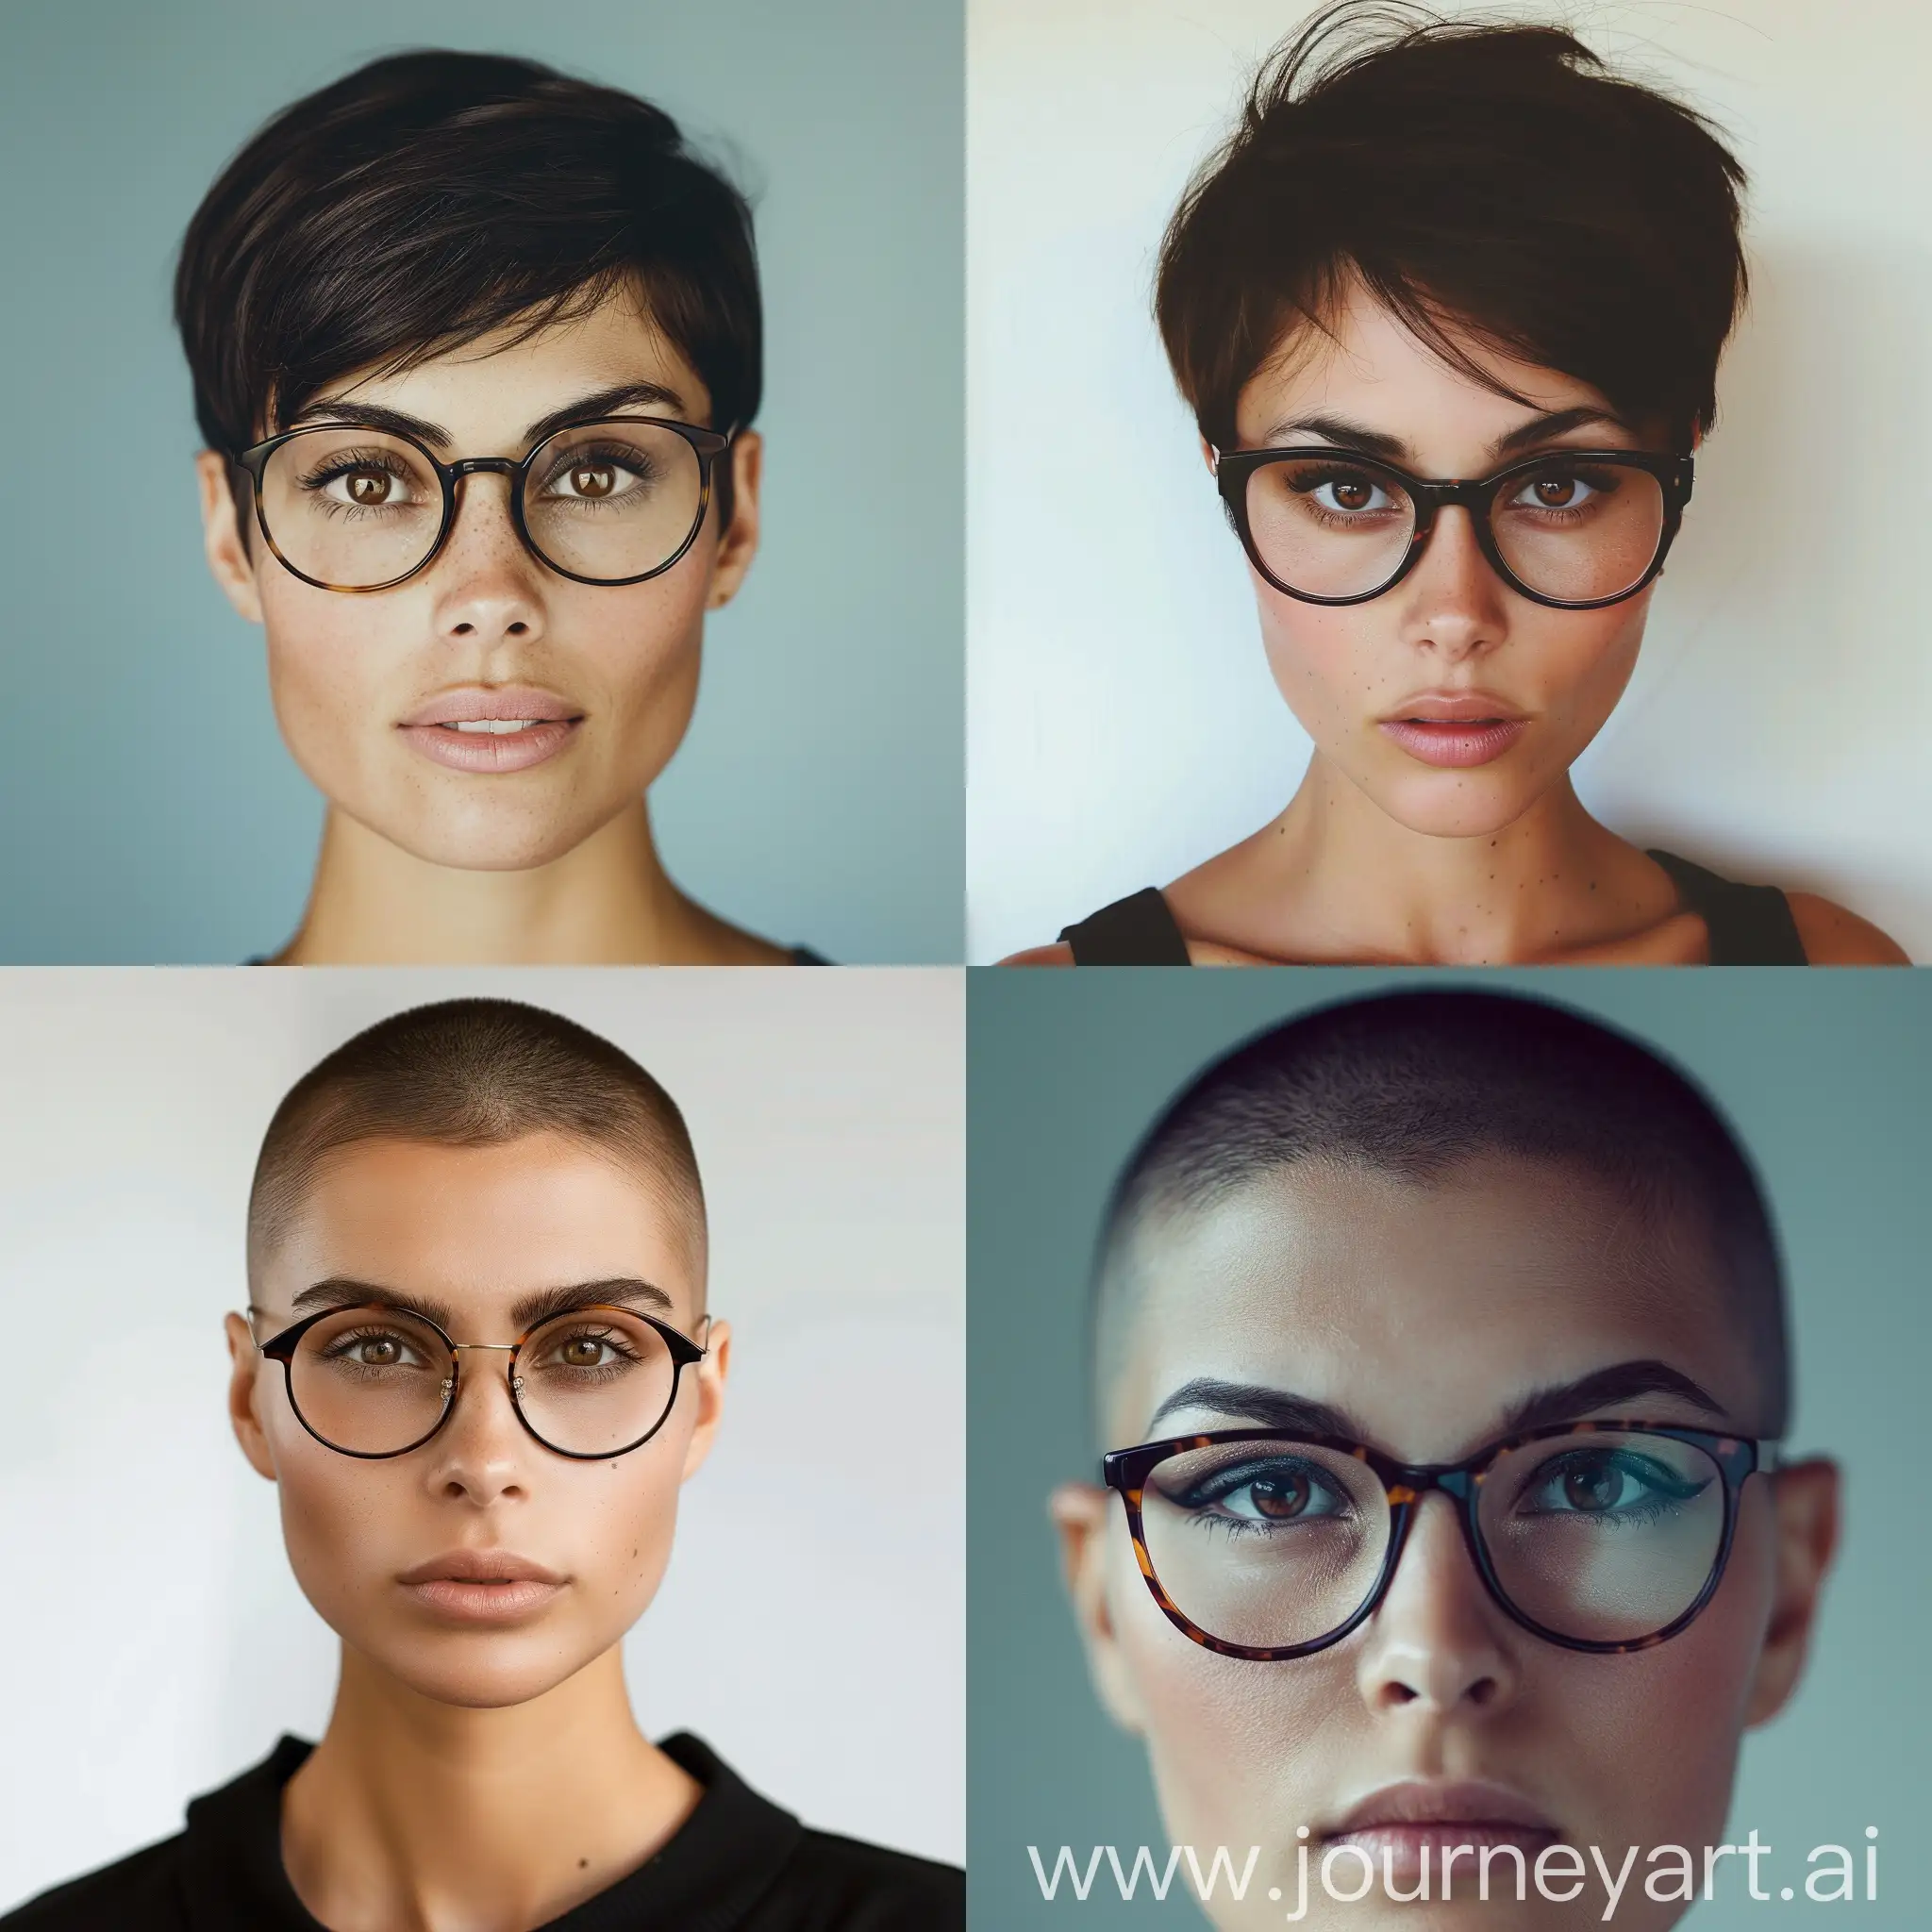 Confident-Woman-with-Short-Haircut-and-Glasses